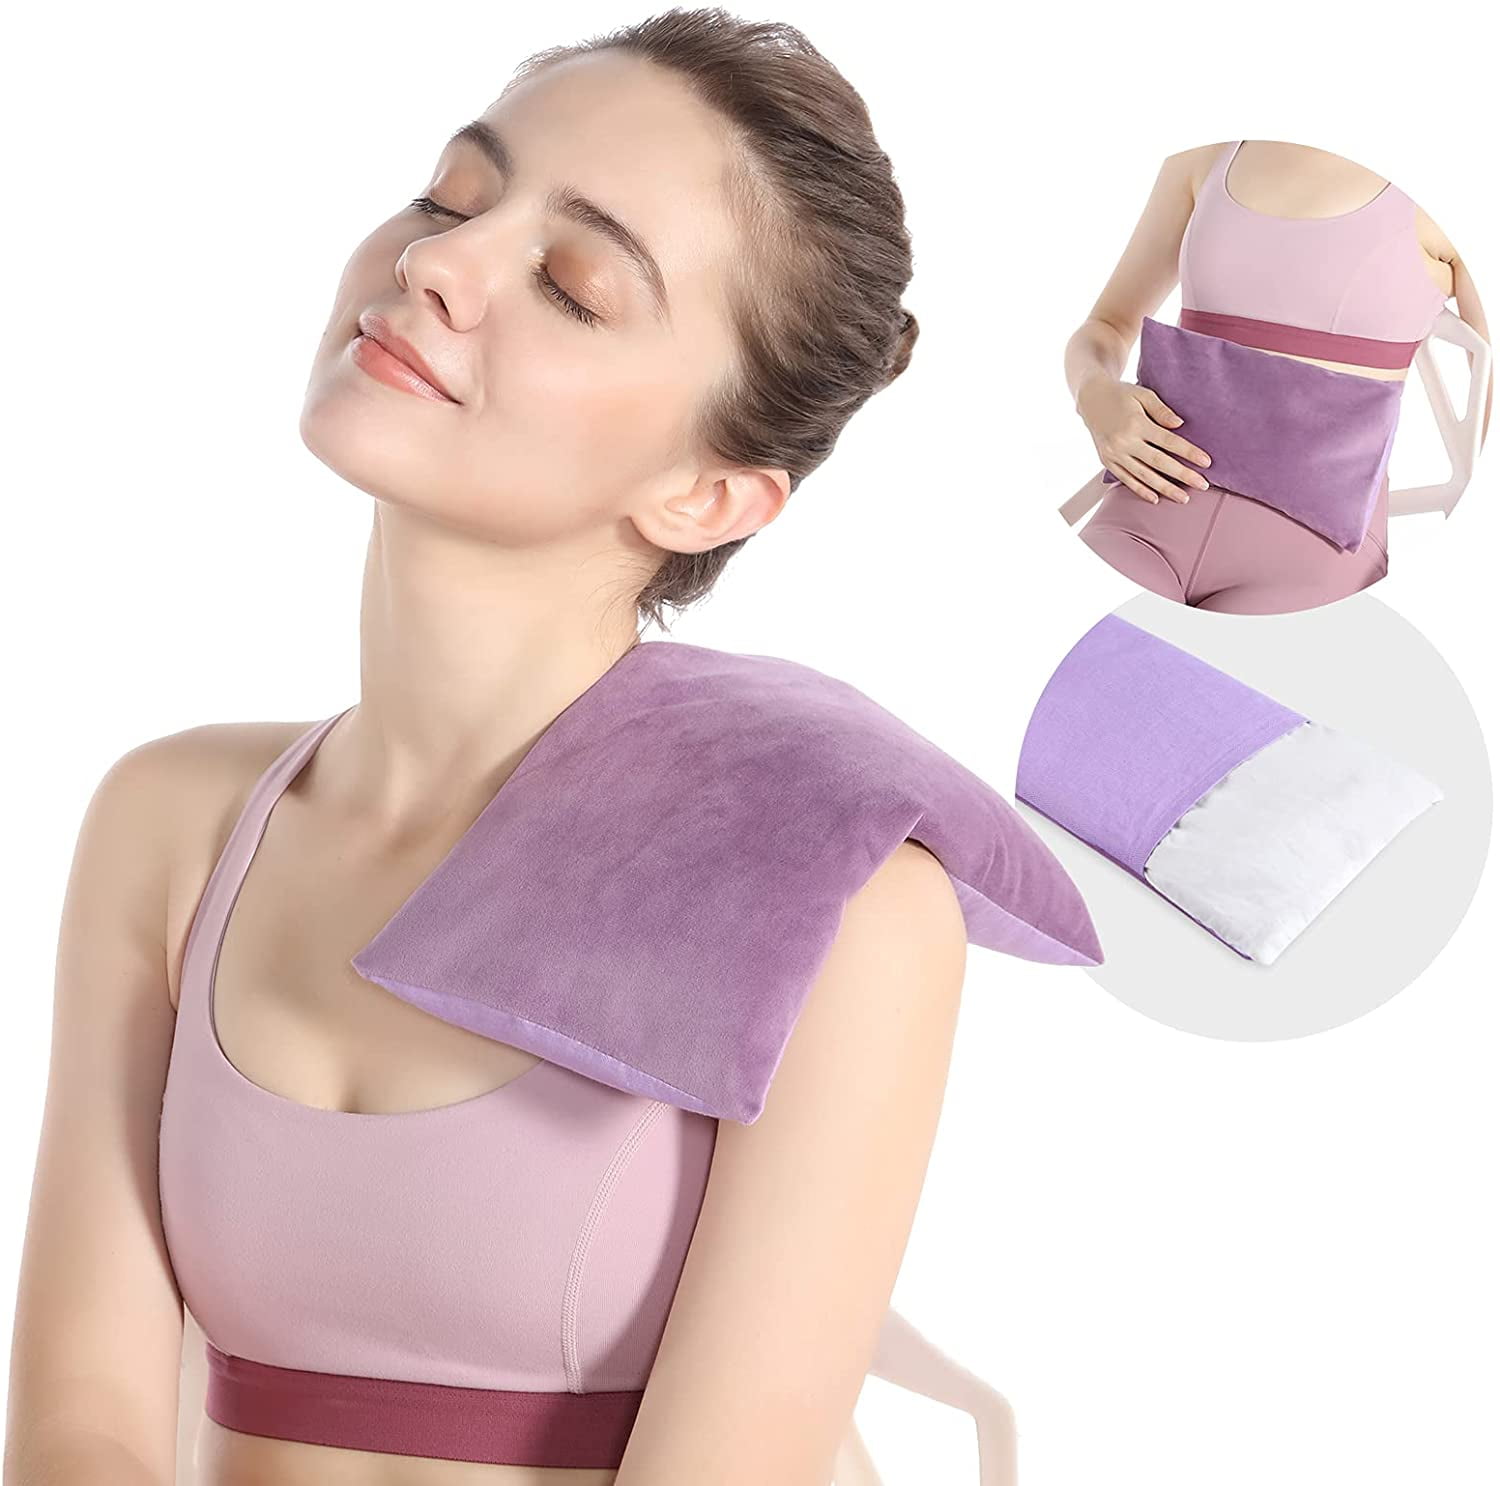 Moist Heat Therapy Heating Packs Microwavable Aromatherapy Heating Pad Cooling Therapy Herbal Therapeutic Healing Flax Seed Dried Lavender Lavender Microwave Heating Pad Lavender Eye Pillow 